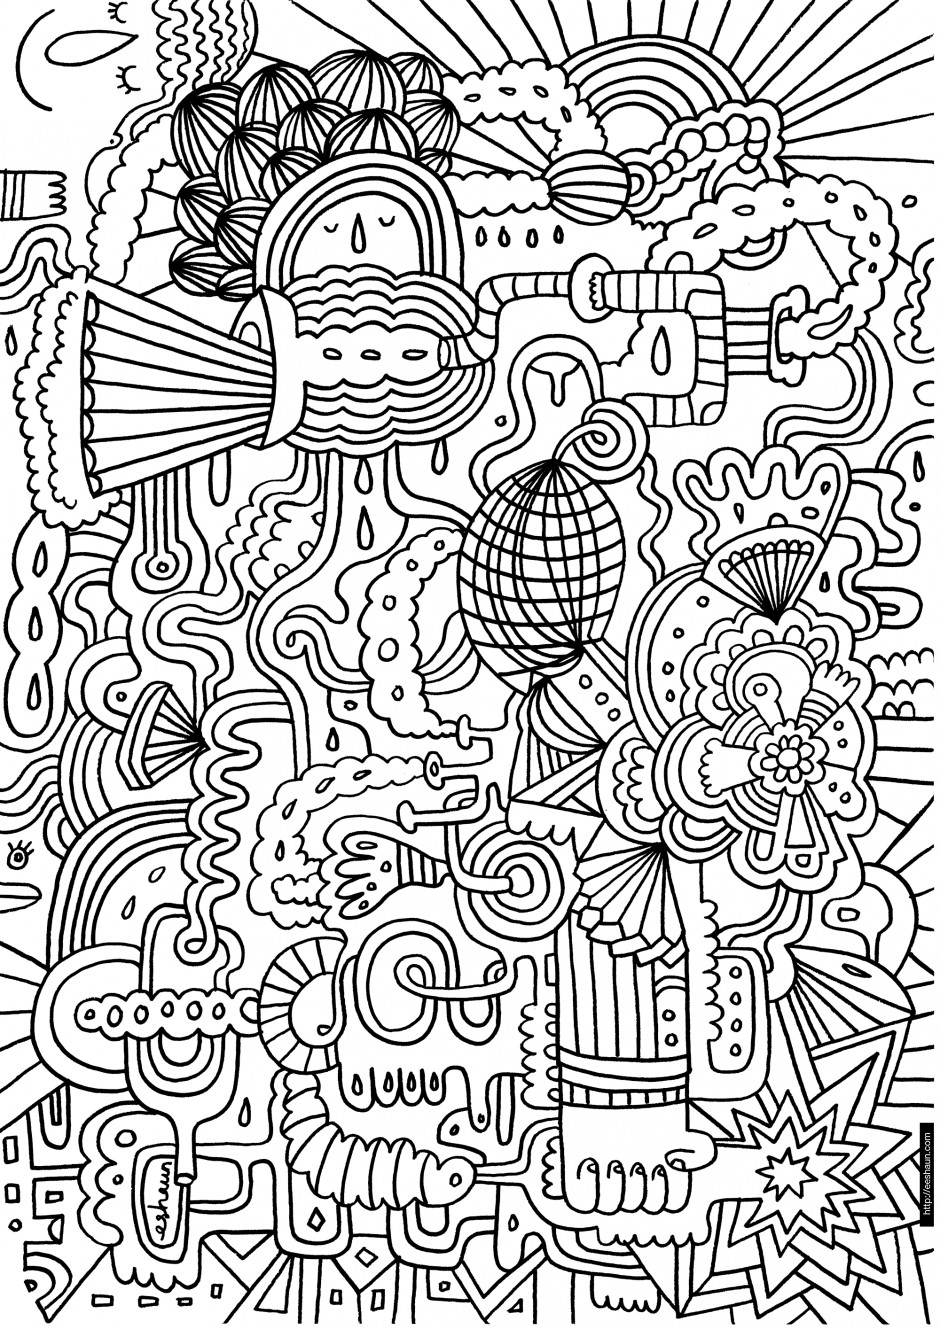 Challenging Coloring Pages For Adults
 Coloring Pages Difficult but Fun Coloring Pages Free and